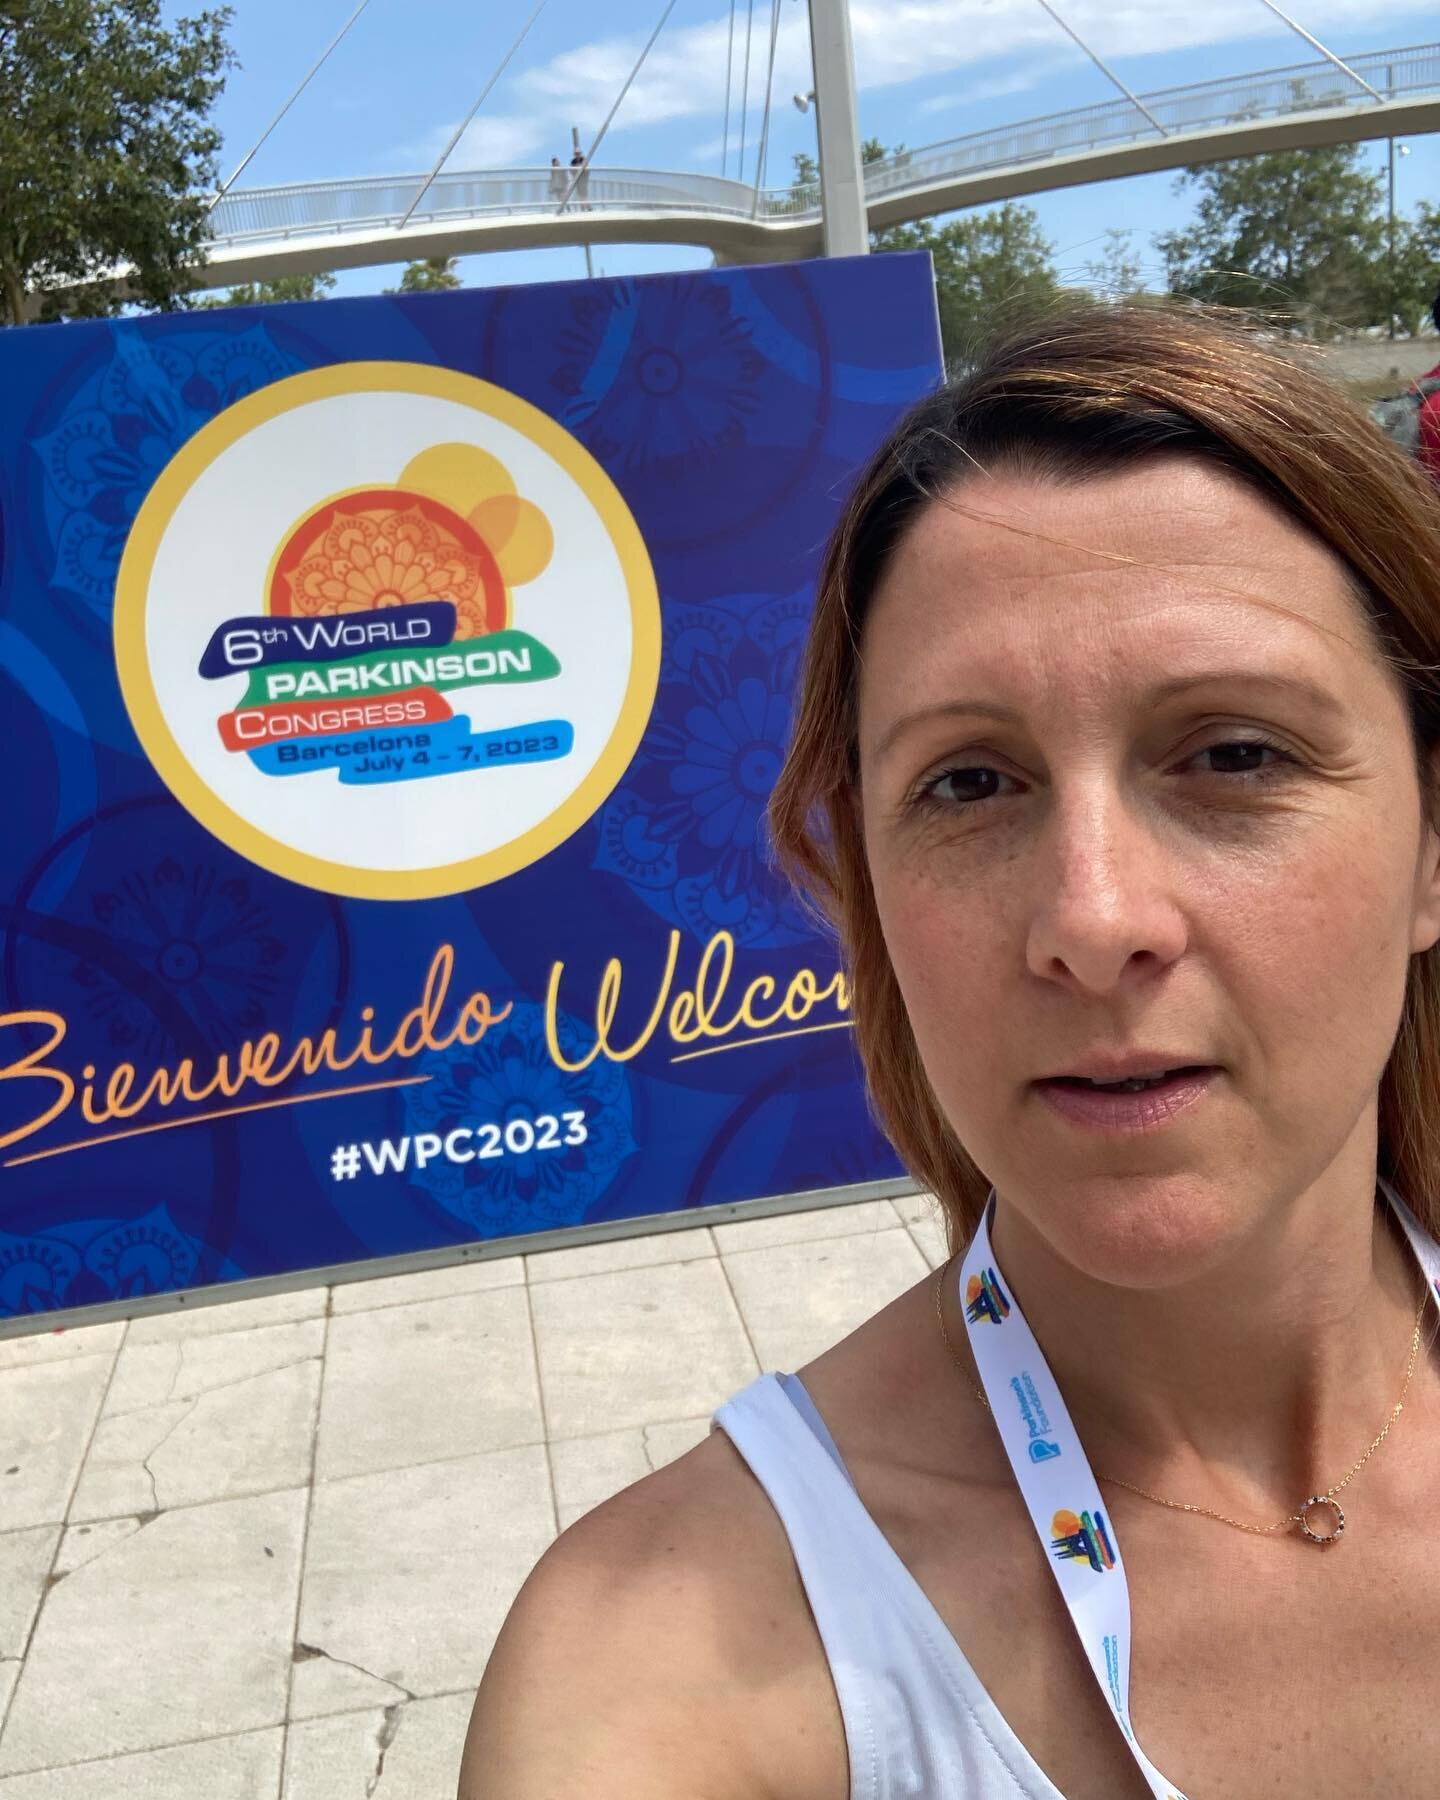 @worldpdcongress Barcelona day 1 done 😅 it&rsquo;s been fantastic and I&rsquo;ve only been here for a few hours. Can&rsquo;t wait for more learning, networking and presenting tomorrow 🙌 let&rsquo;s all work together to better the lives of people wi